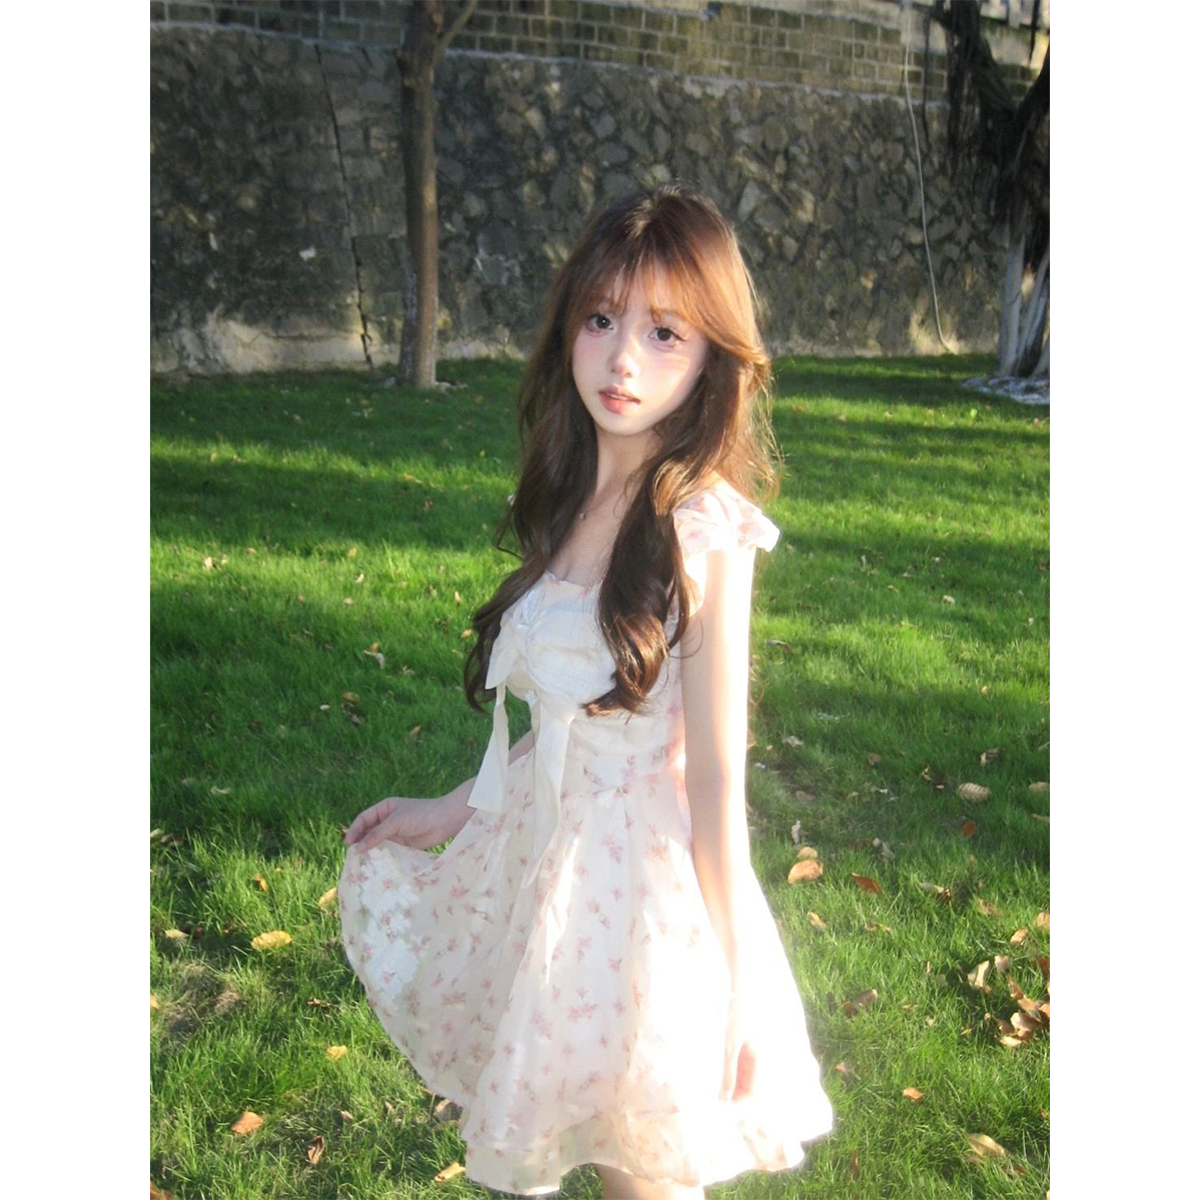 The Dress Is Girly Sweet Pure And CuteWith A Bow White And Thin Square Neck And Floral Skirt - Jam Garden